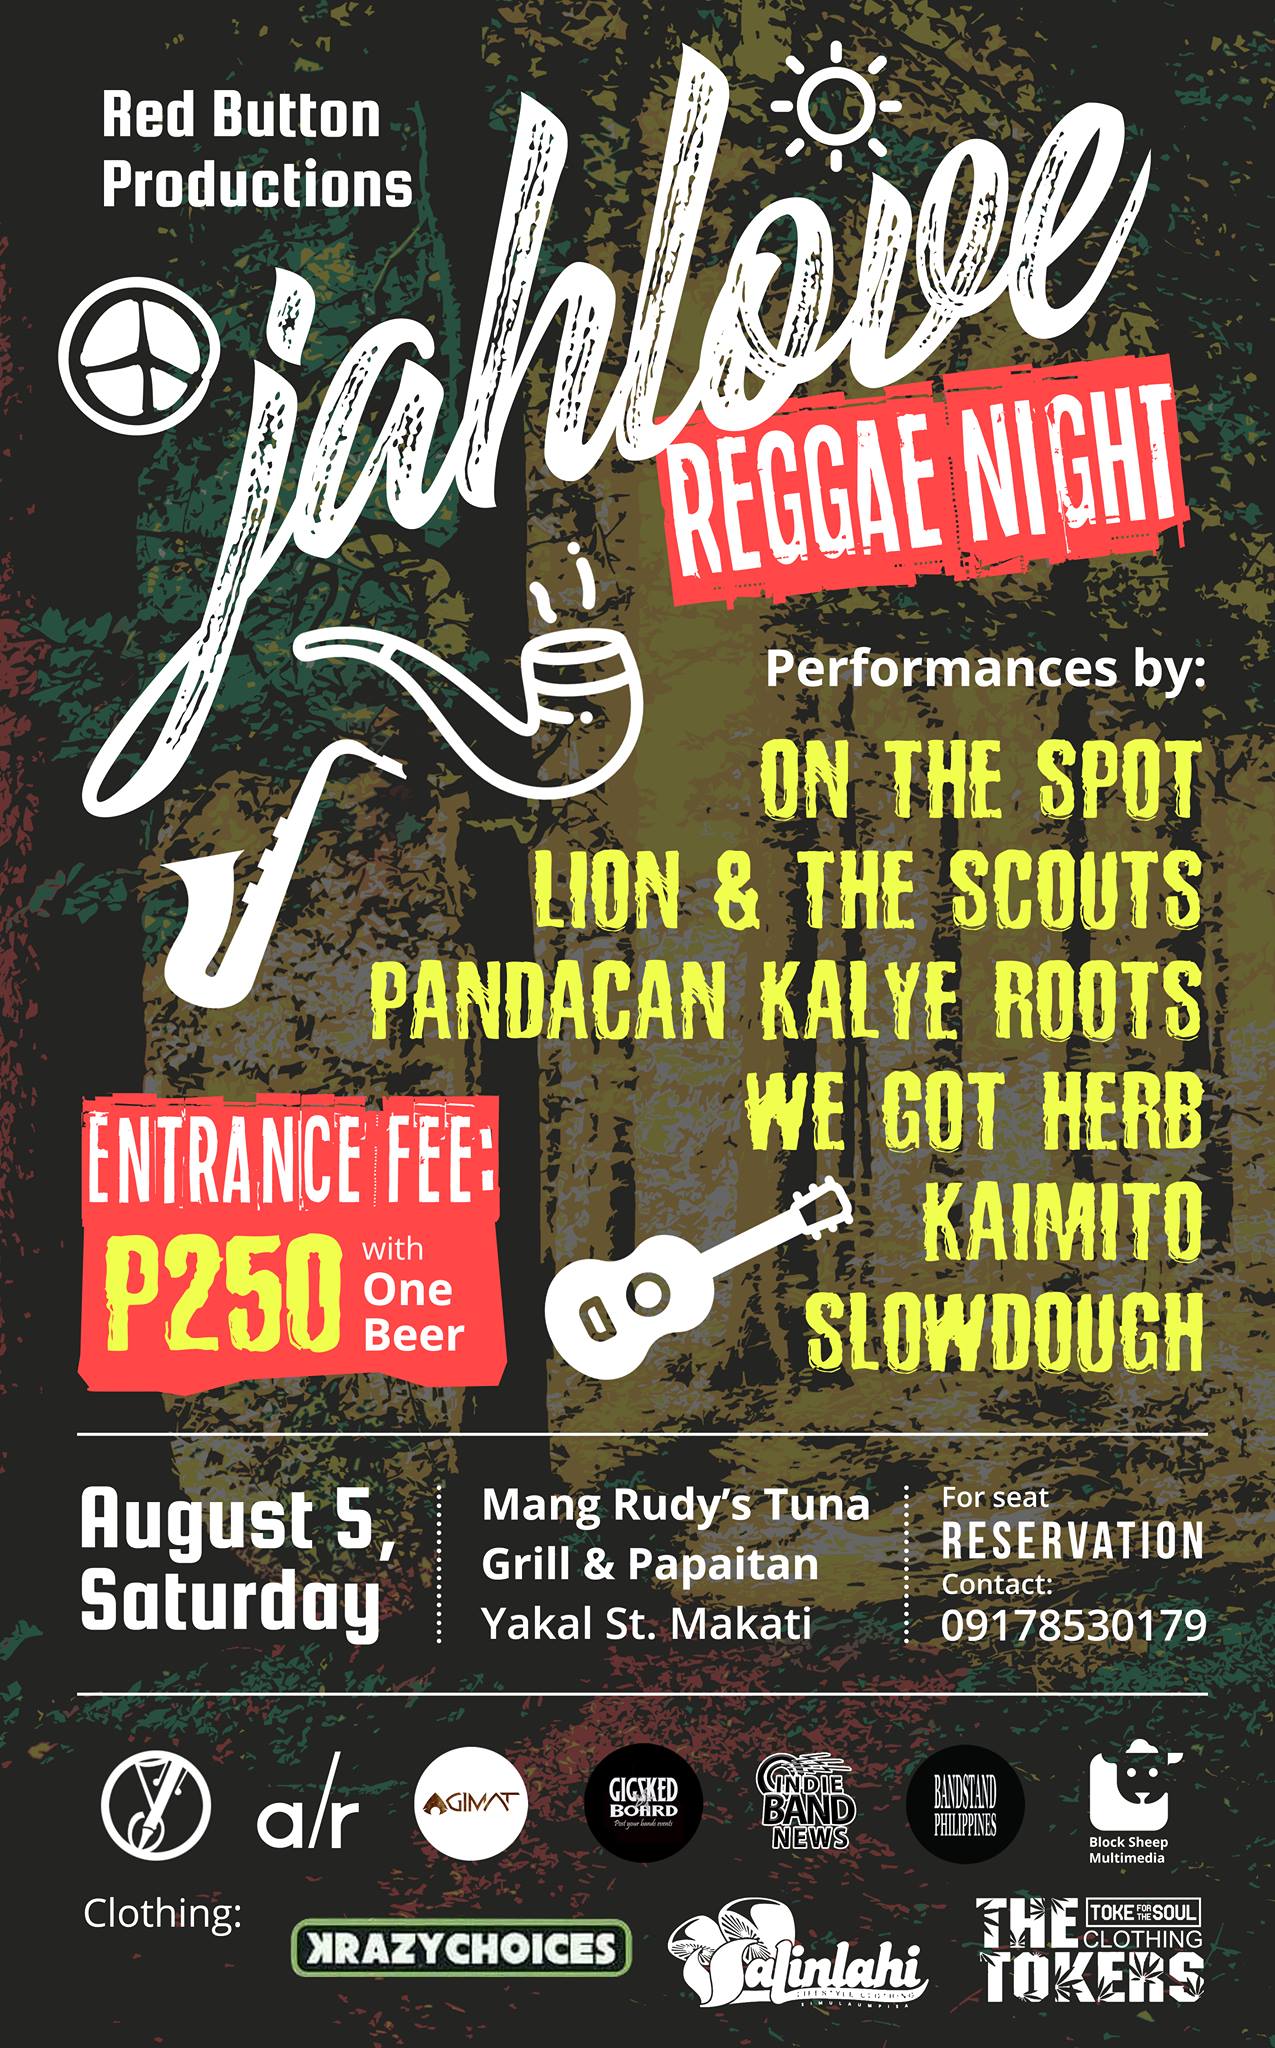 Red Button Productions Page Liked · Paid· July 19 · Red Button Productions present JAHLOVE: Reggae Night Red Button Event #266 August 5, Saturday | 8:00pm at Mang Rudy's Tuna Grill And Papaitan, Yakal Street, Makati Entrance Fee: P250 with 1 drink performances by: On The Spot Lion and the Scouts Pandacan KALYE ROOTS We Got Herb Michael Adrian Kaimito Pasok Slowdough Event Link: https://www.facebook.com/events/912069992293393 Media Partners: Block Sheep Multimedia Indie Band News Bandstand Philippines Gig Sked Board Agimat: Sining at Kulturang Pinoy Songwriters Philippines Adobo Radio The Tokers Salinlahi Lifestyle Clothing KRAZY CHOICES — feeling excited at Mang Rudy's Tuna Grill And Papaitan. — Products shown: Red Button Shirt